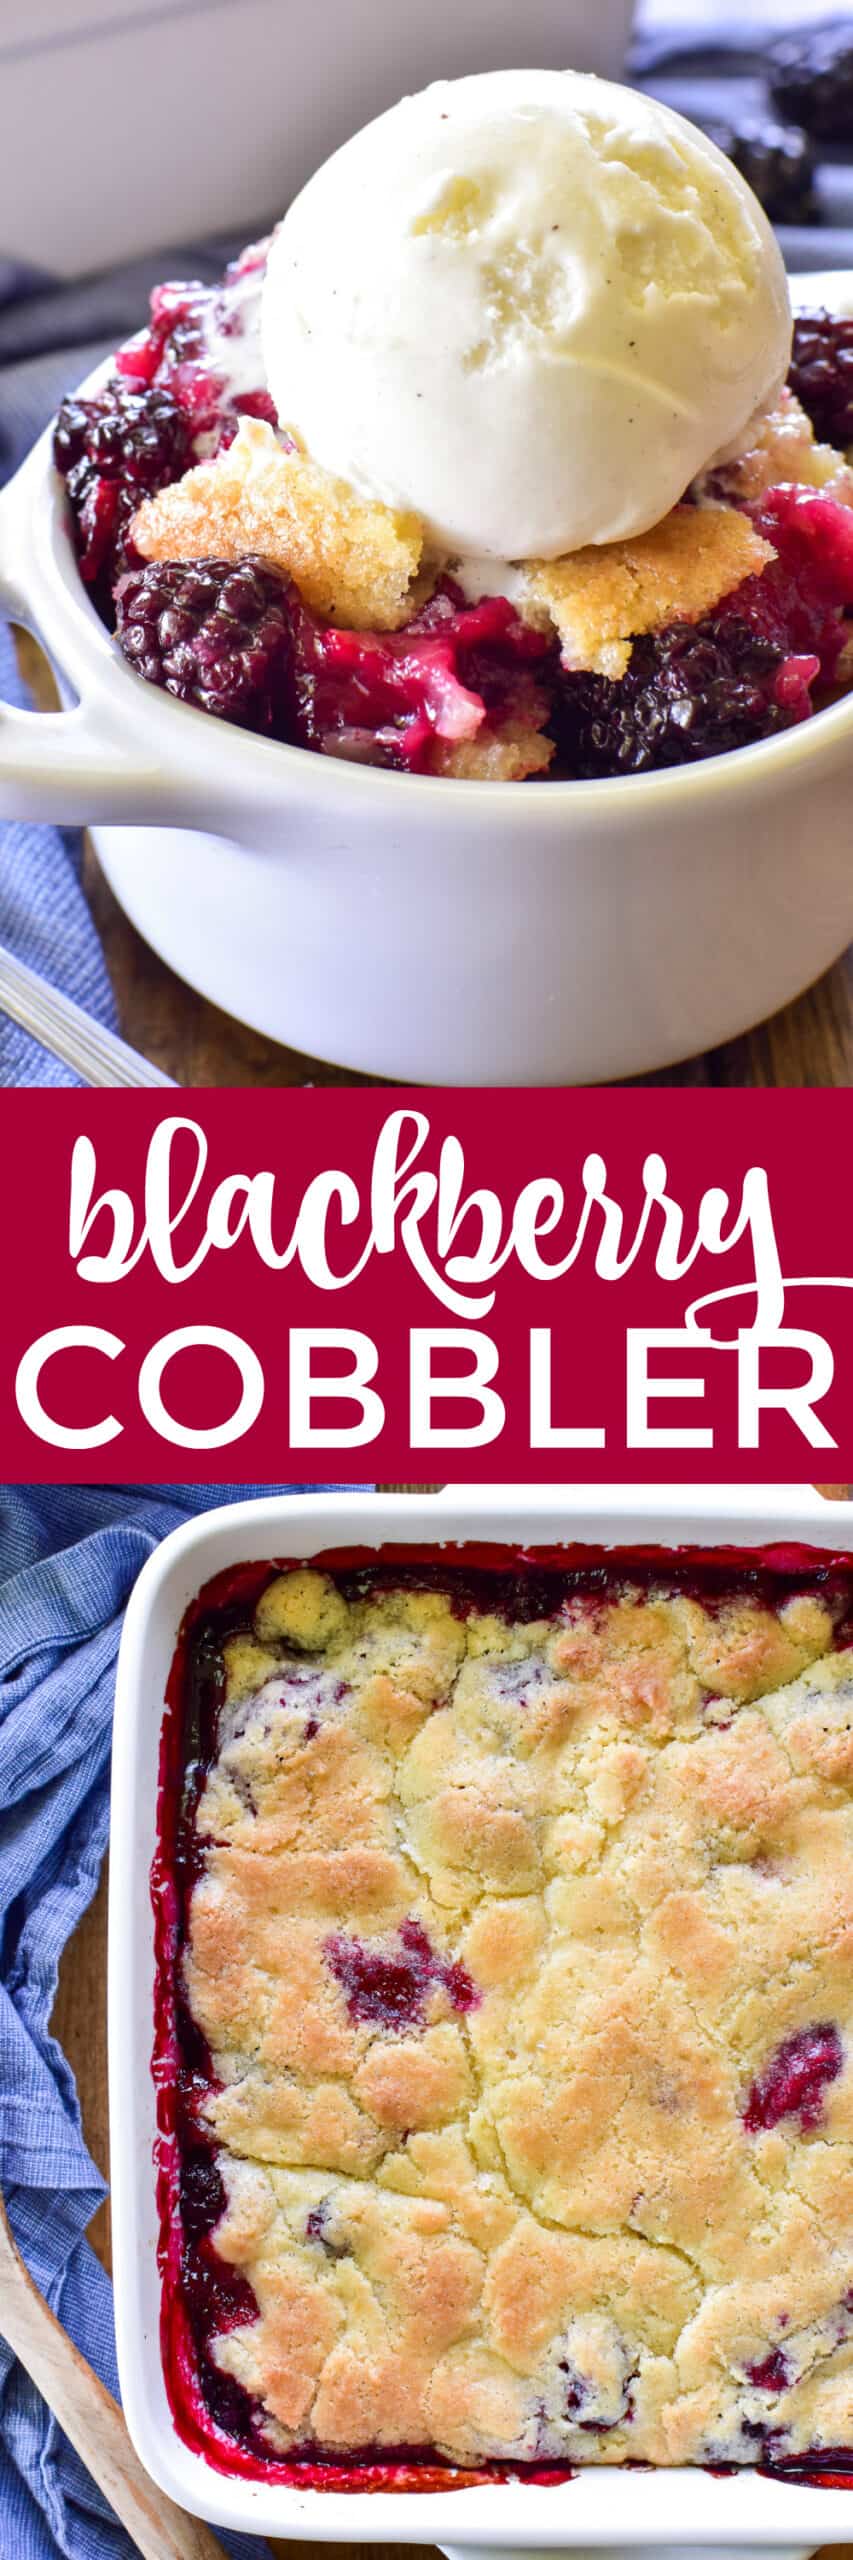 Collage image of Blackberry Cobbler in pan and in a dish with ice cream